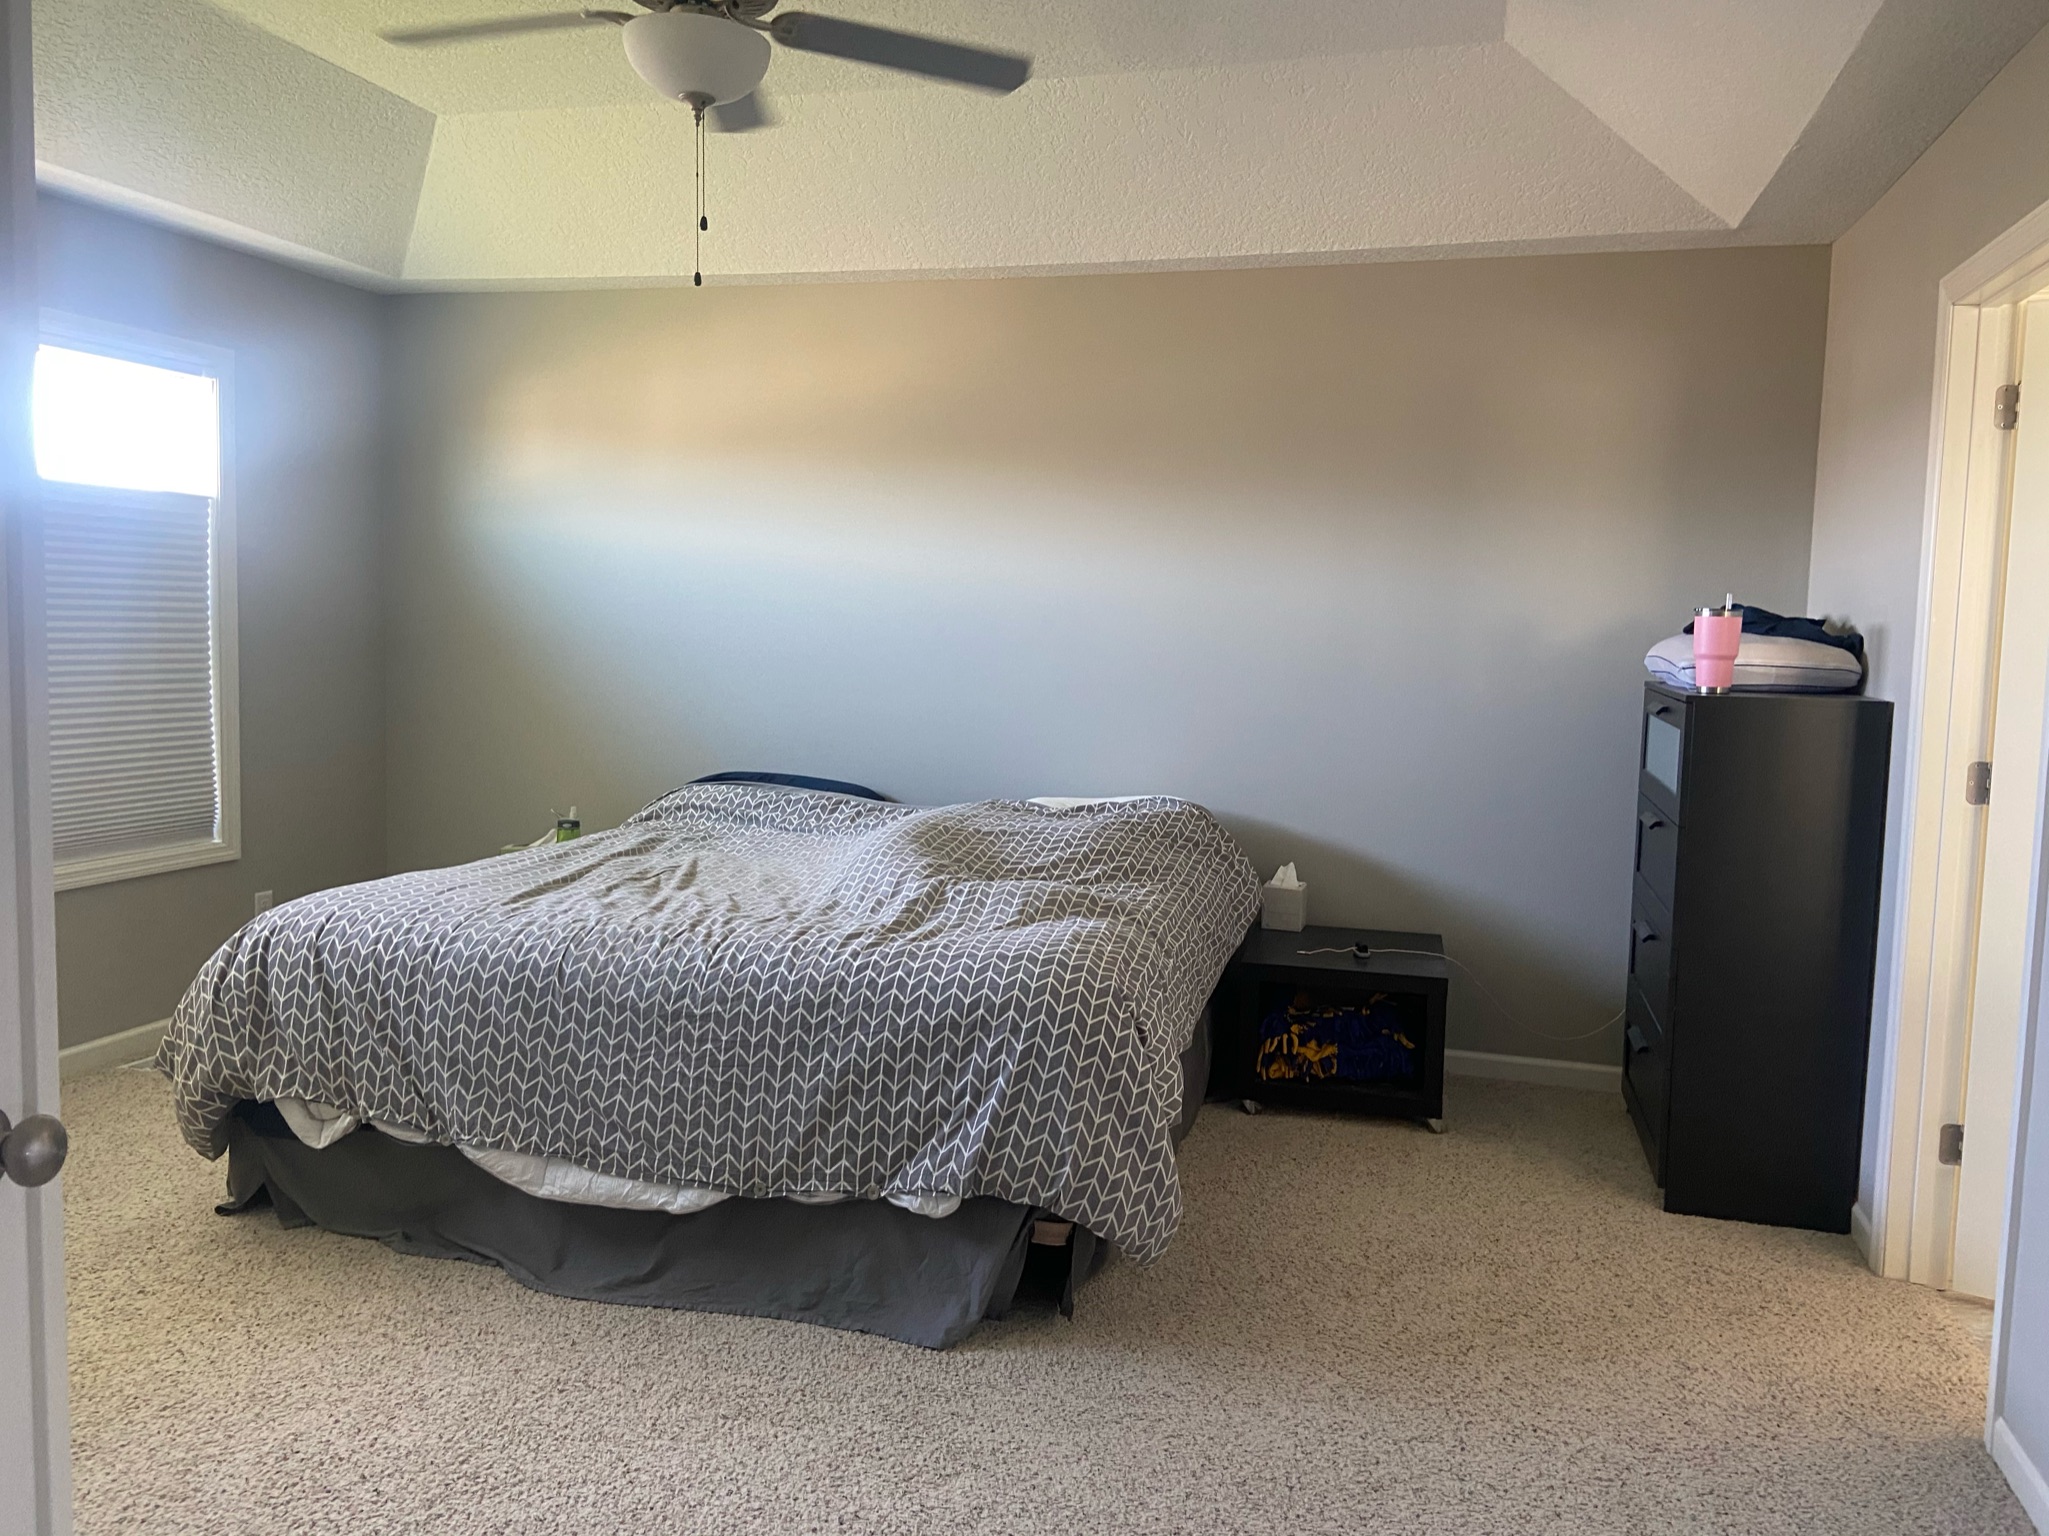 The Trista | Owner's Bedroom - Before